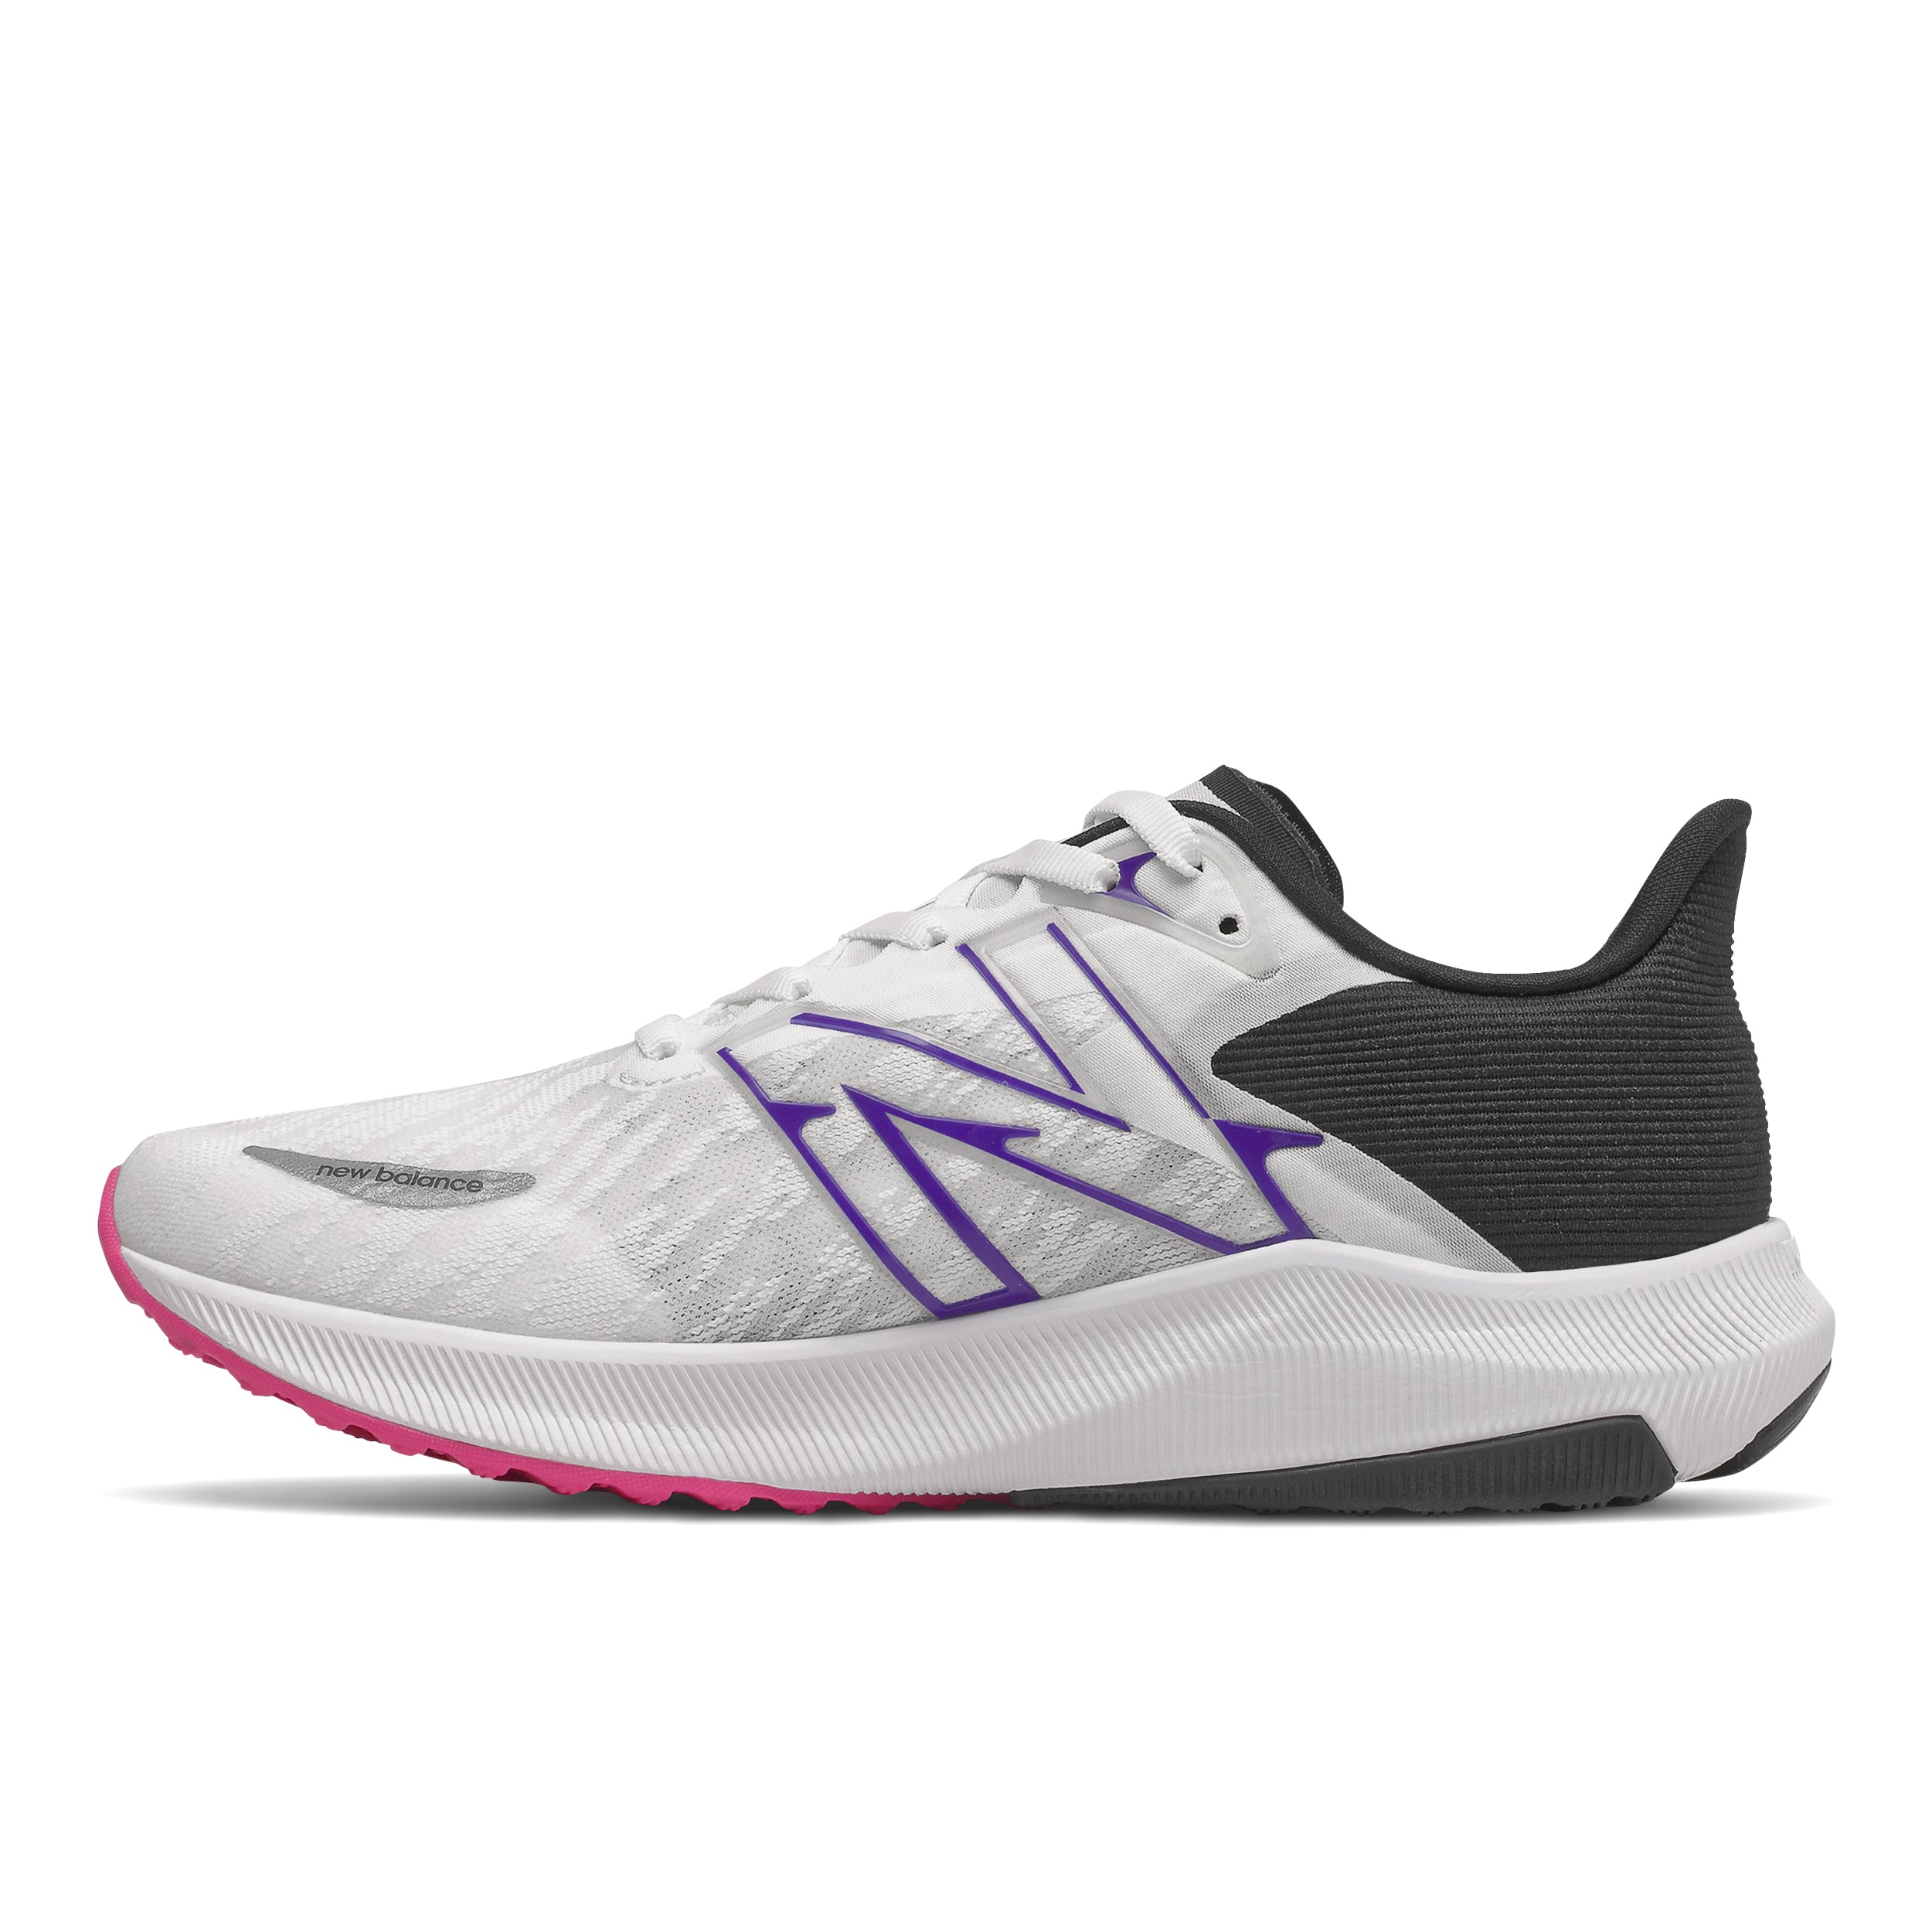 New Balance FuelCell Propel v3 WFCPRLM3 Women's4